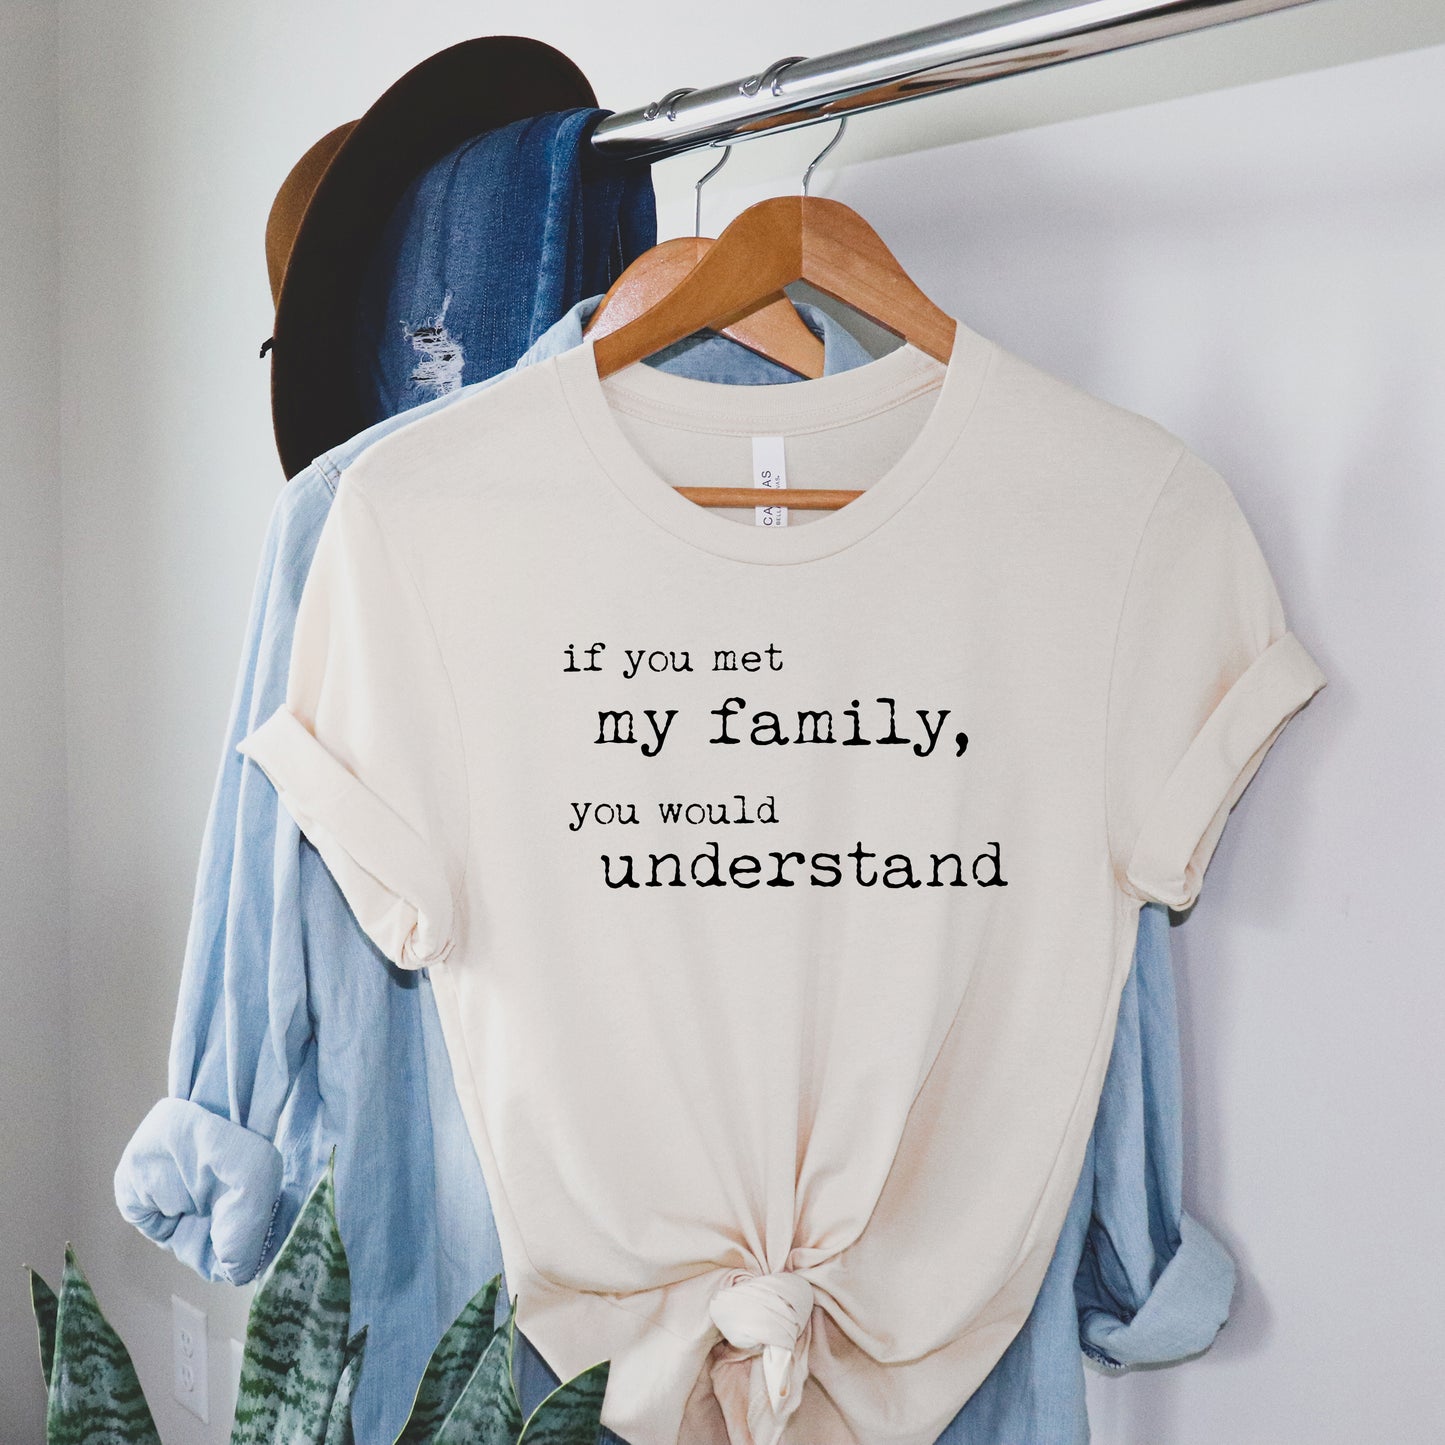 If You Met My Family You Would Understand | Short Sleeve Graphic Tee